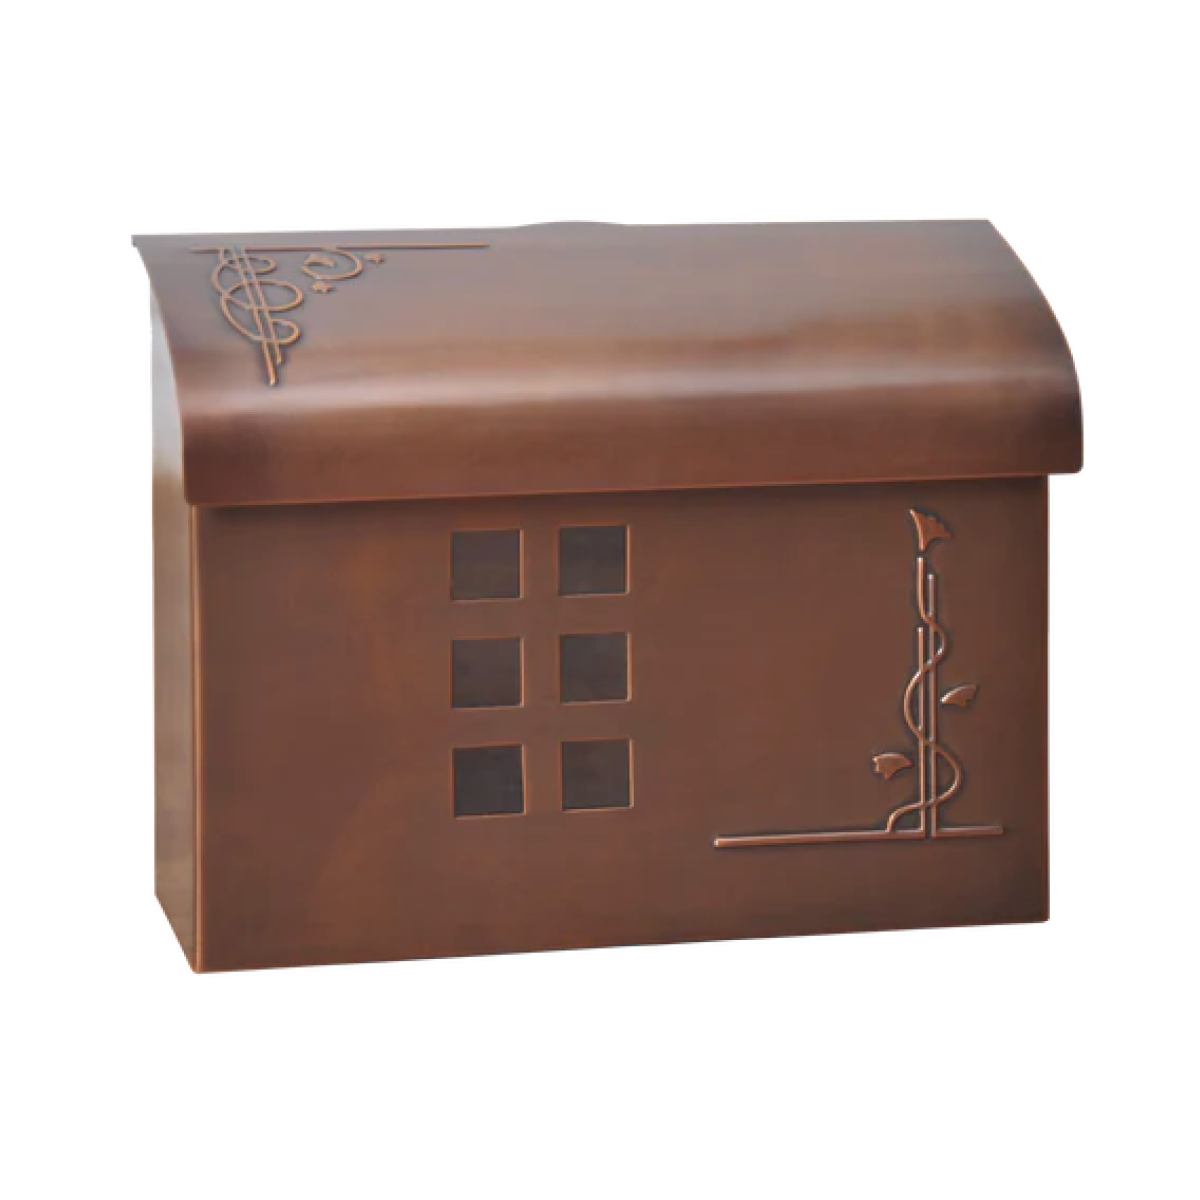 Ecco 7 Wall Mount Mailbox Product Image